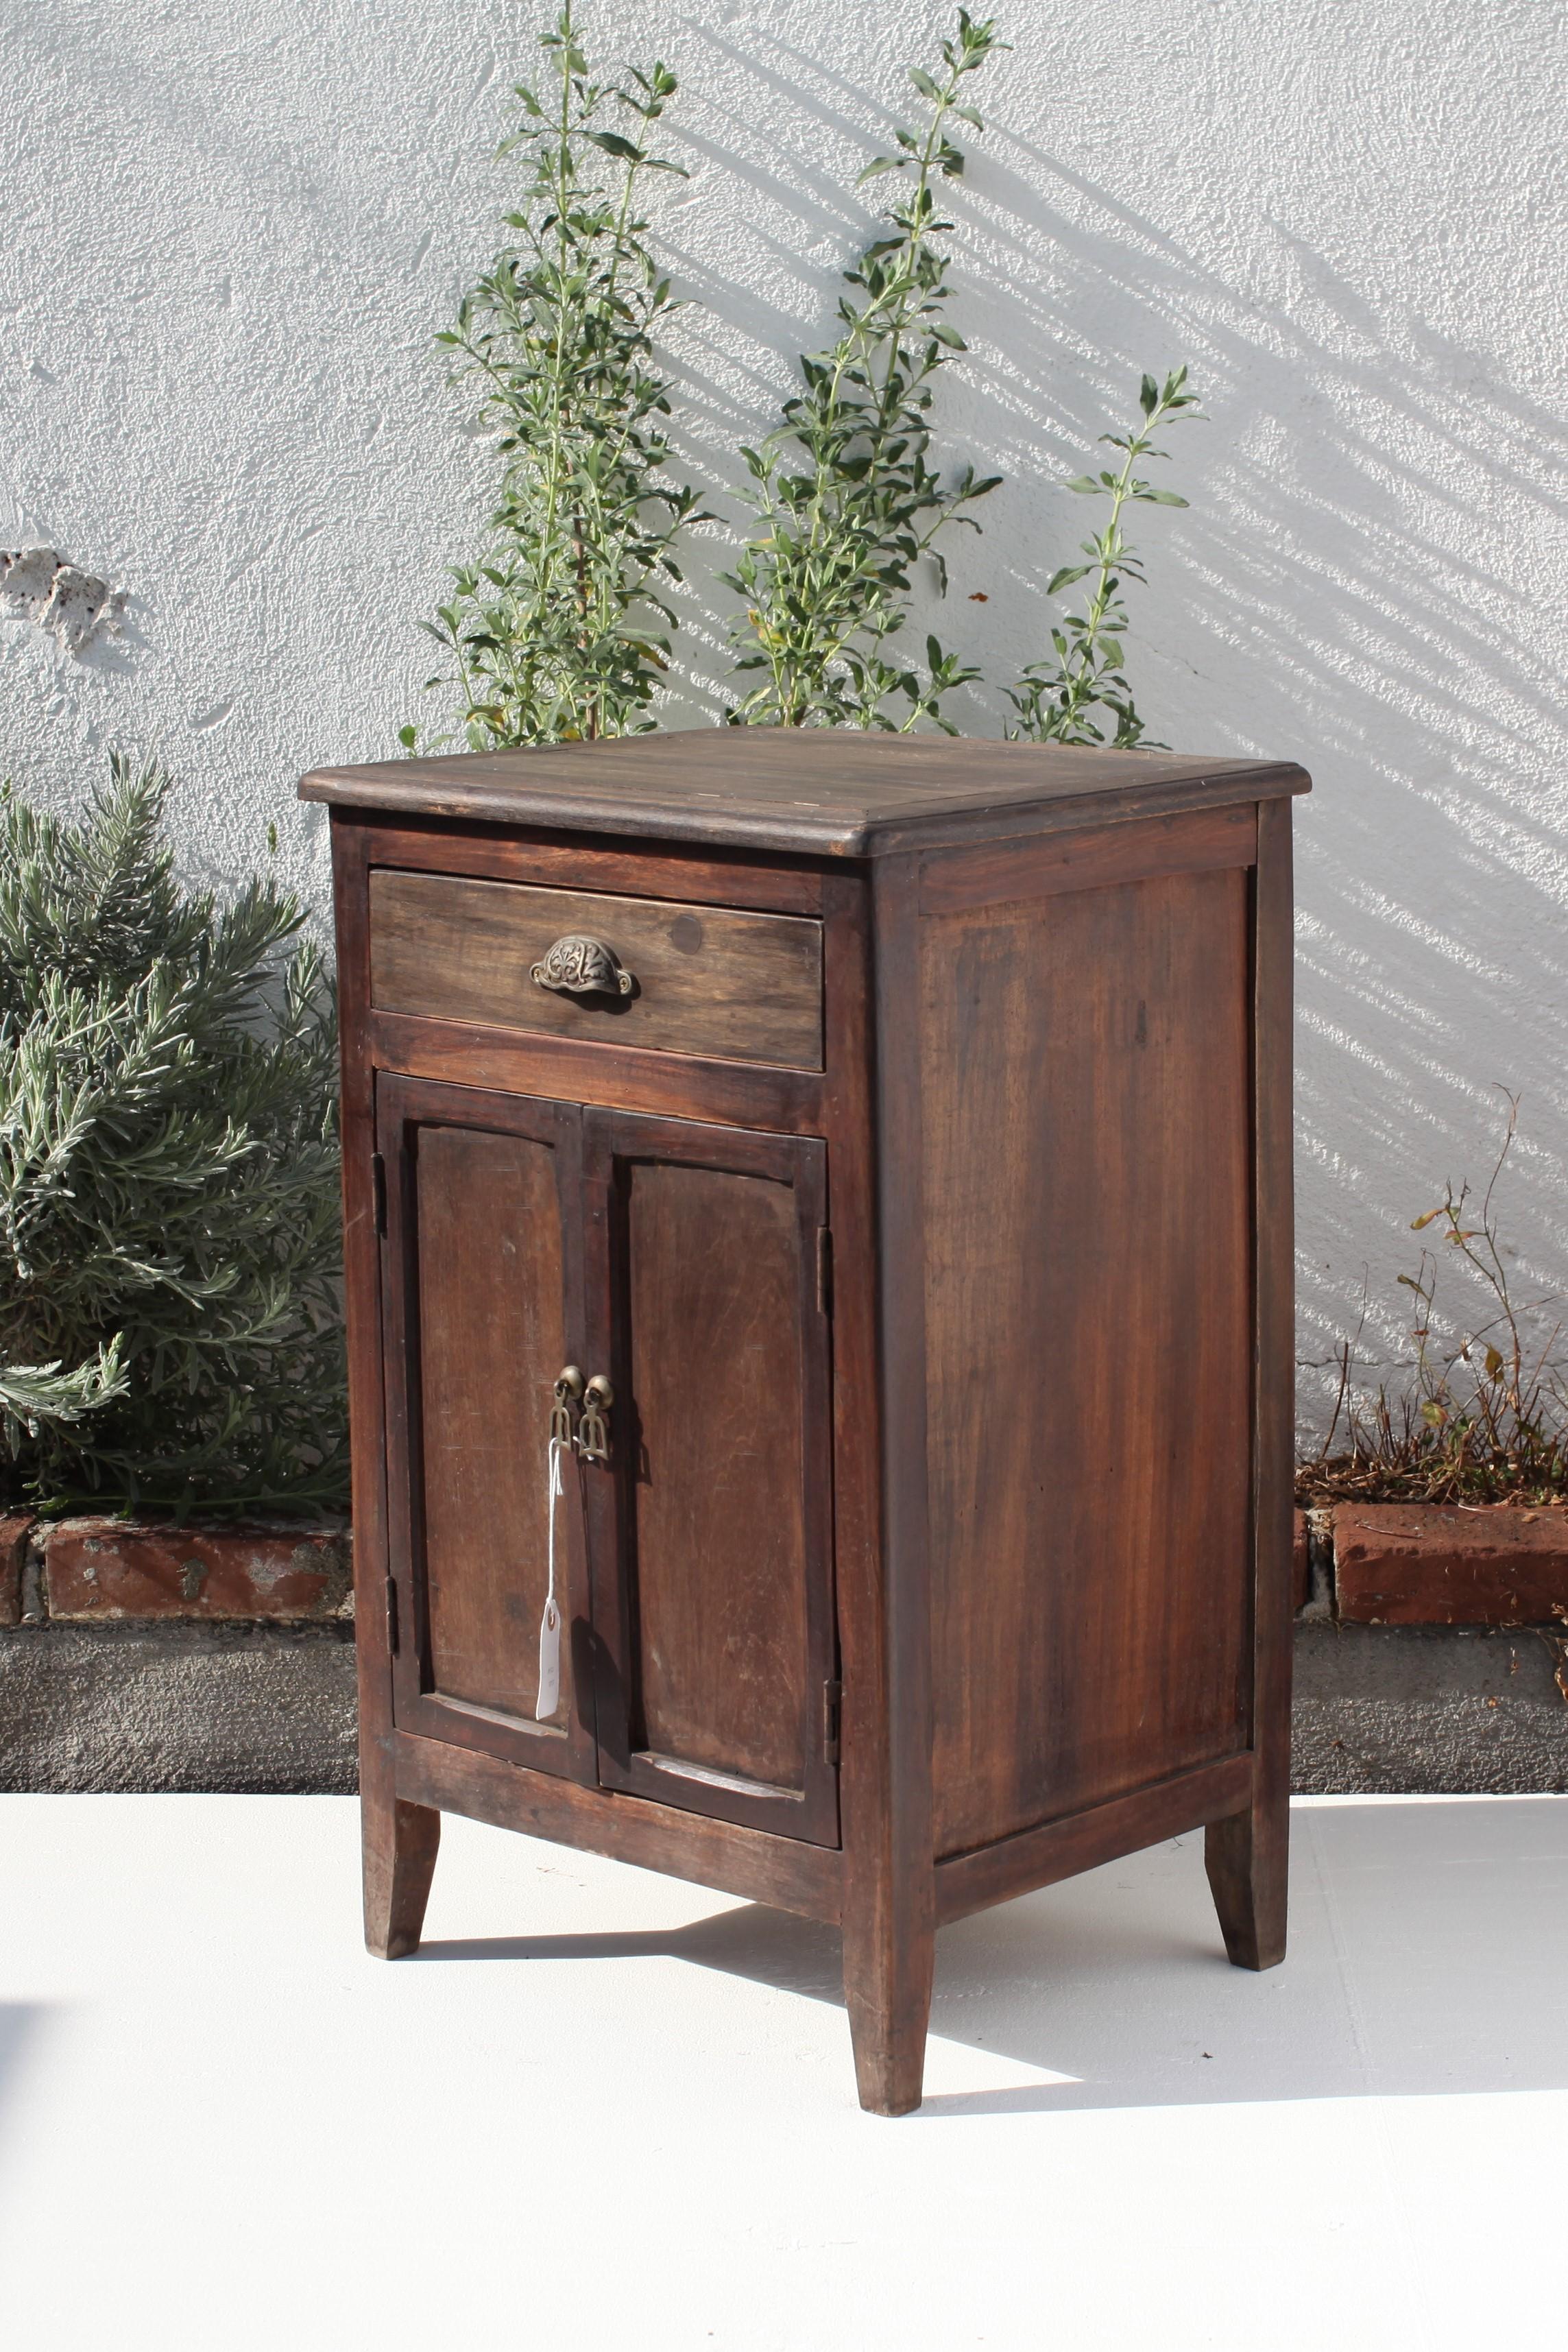 From our Prewar Teak collection originating in Vietnam, this vintage piece was made with exquisite craftsmanship and handiwork. The design has delicate French and European markings, and a beautiful patina that will only continue to age well.